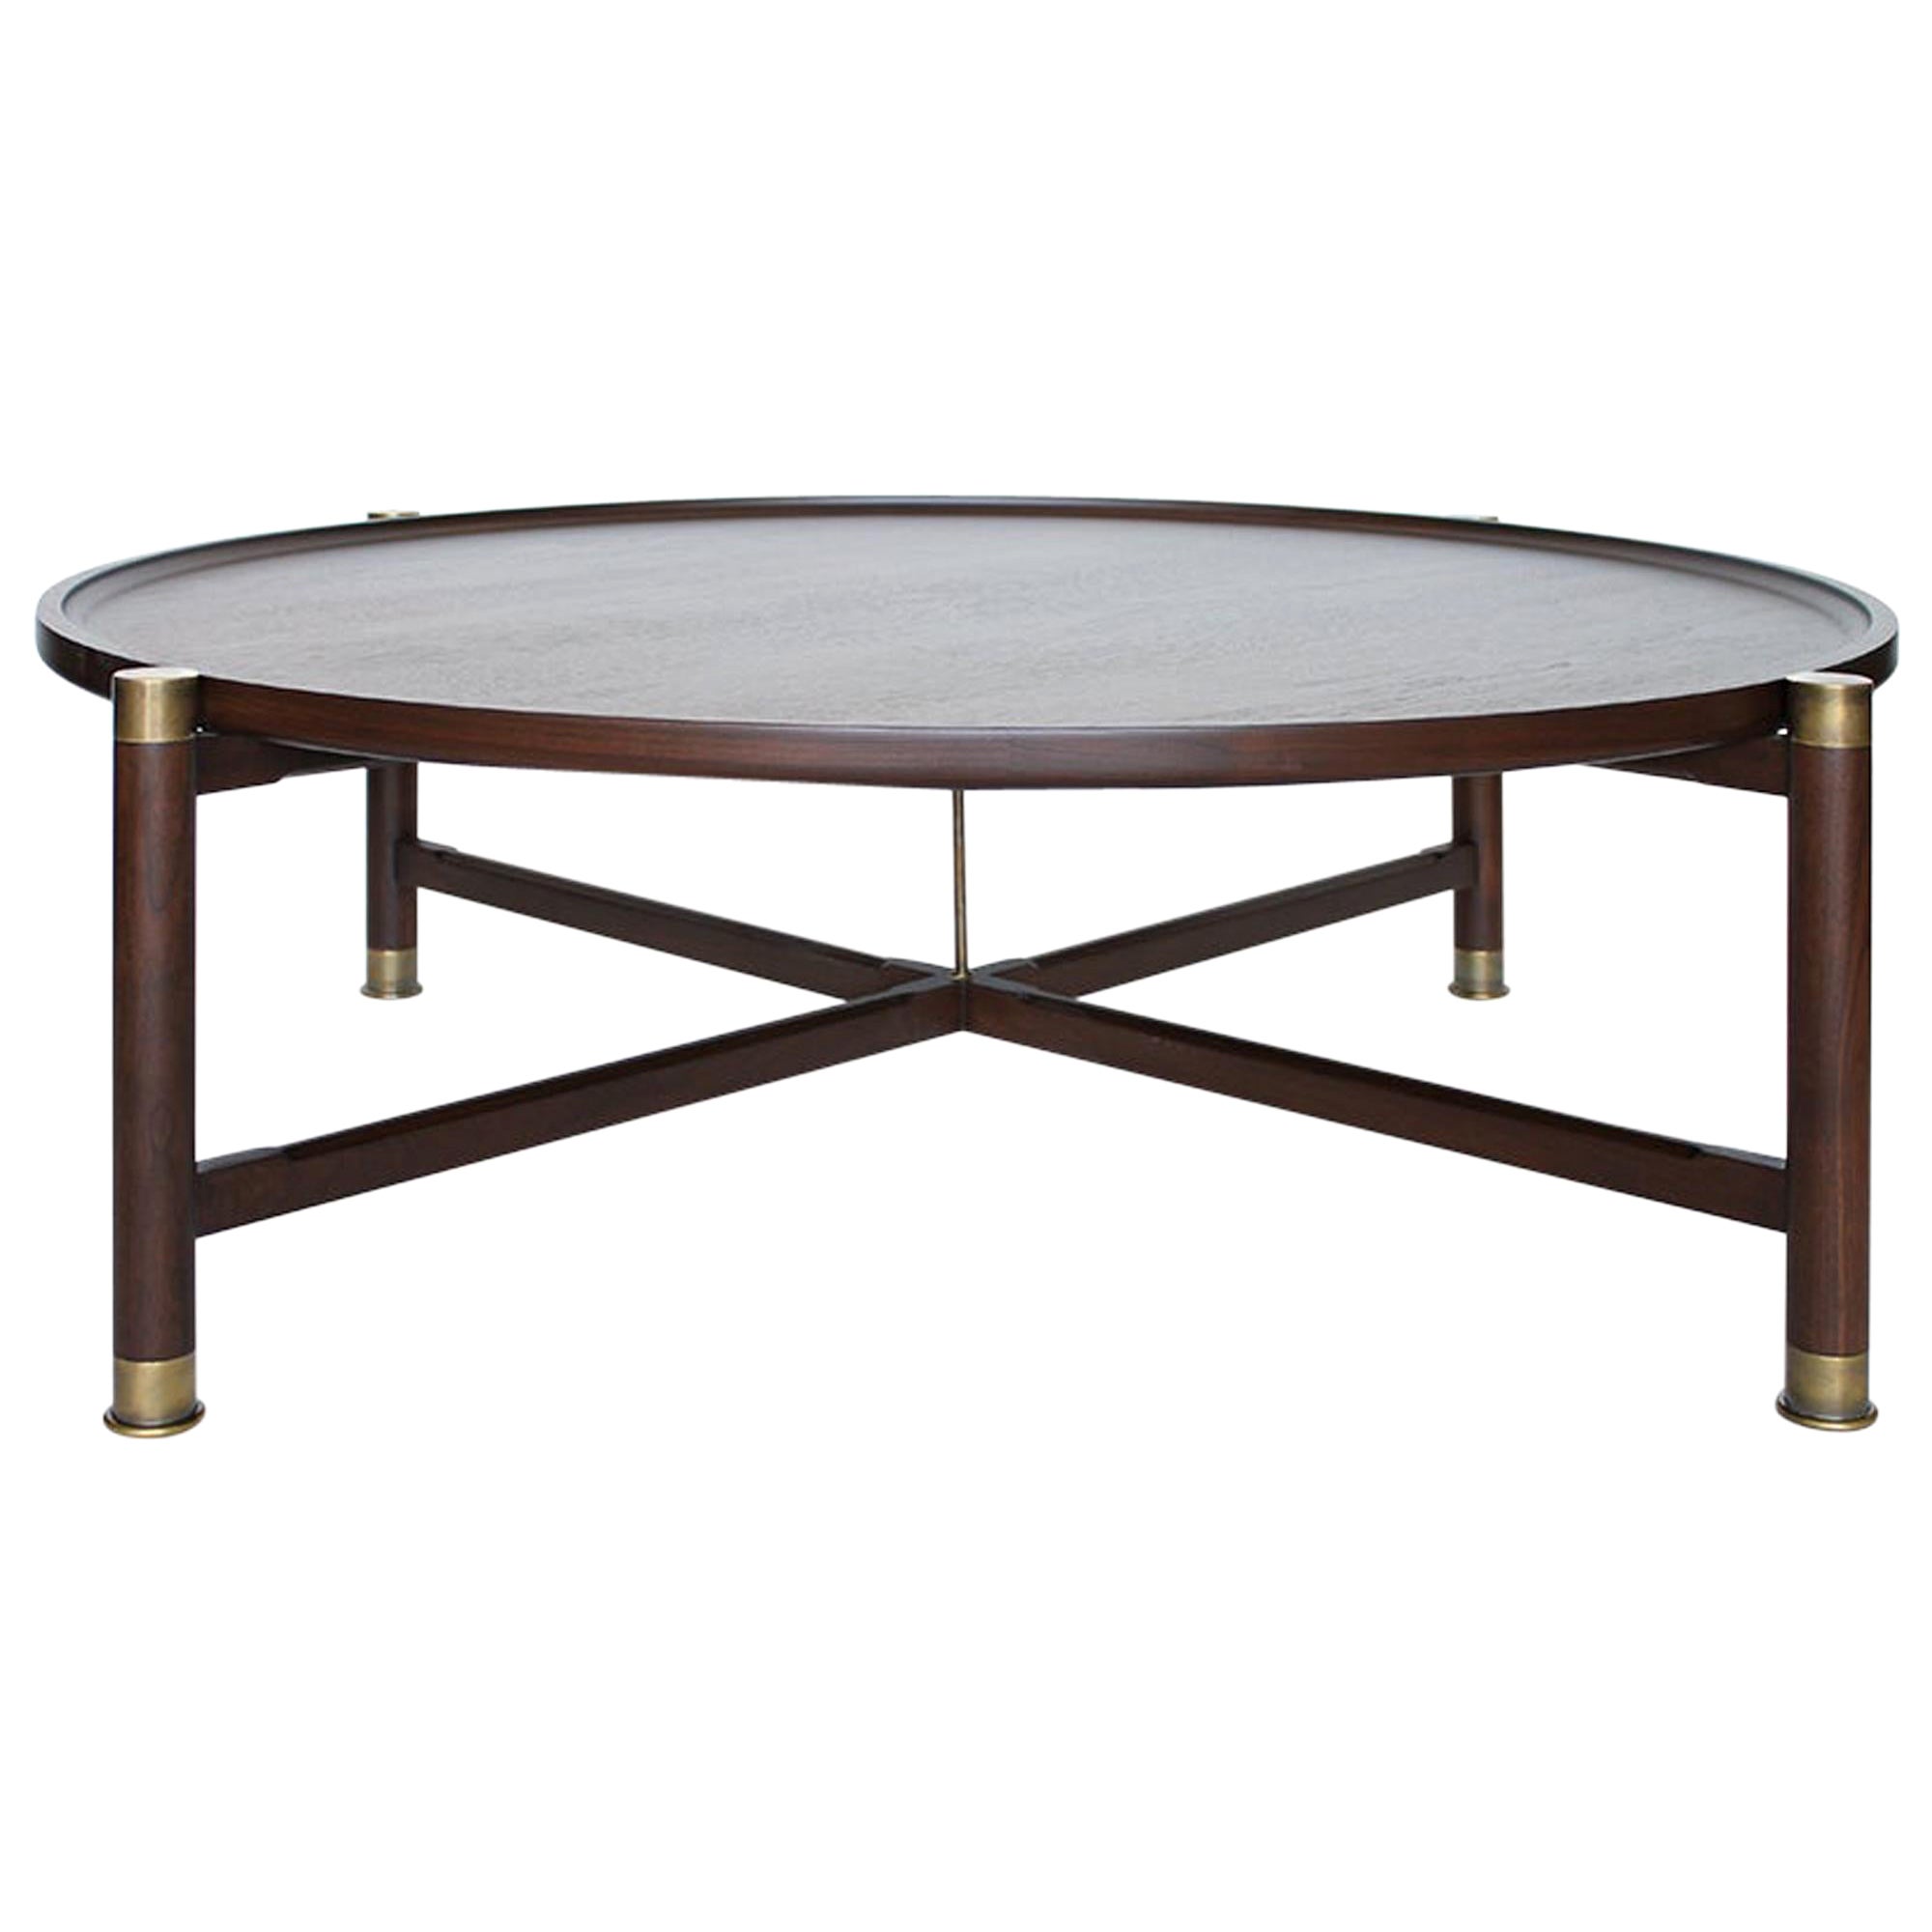 Otto Round Coffee Table in Medium Walnut with Antique Brass Fittings For Sale